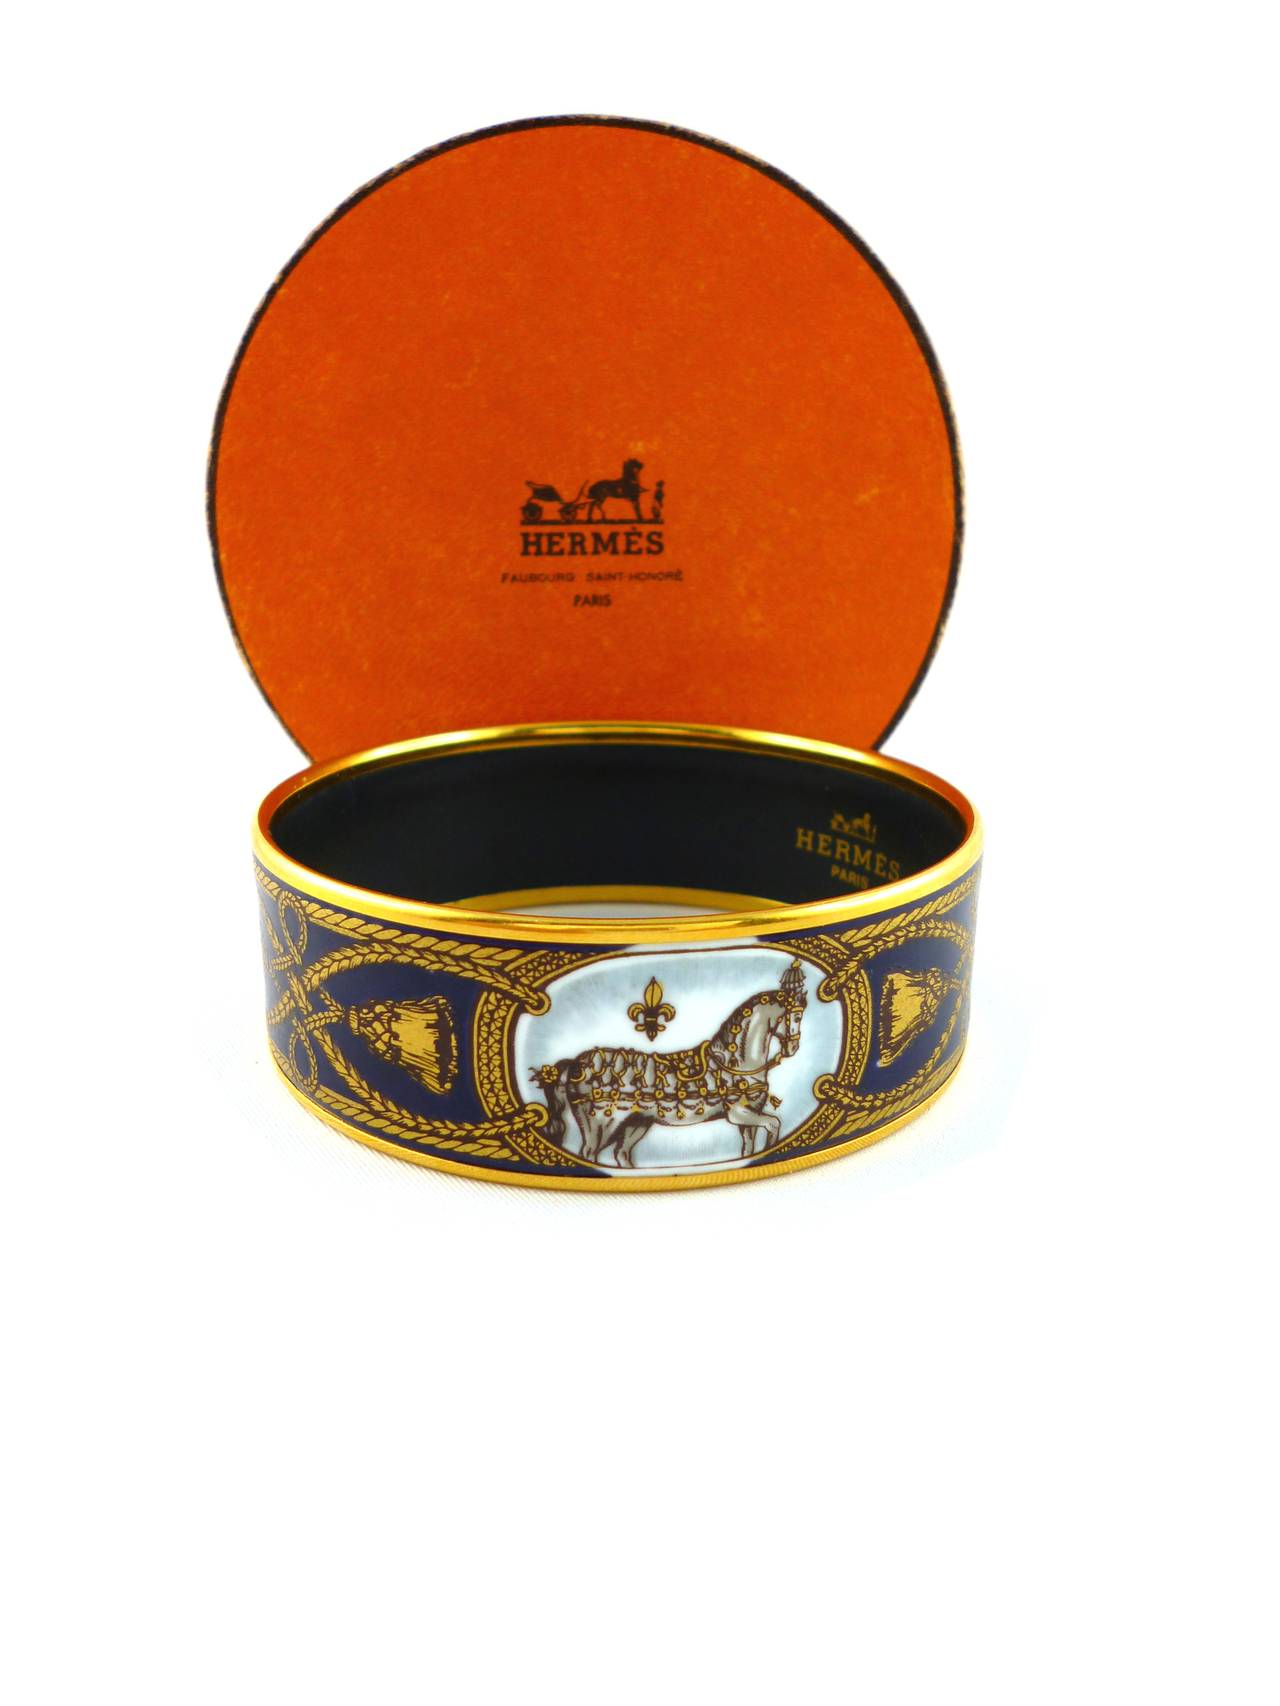 HERMES vintage Grand Apparat printed enamel wide cuff bracelet.

Printed enamel horses with gold tone brandebourg and tassel patterns on a deep blue background. Gold plated rim.

Size PM (65).

Marked HERMES Paris Made in Austria.
Stamped